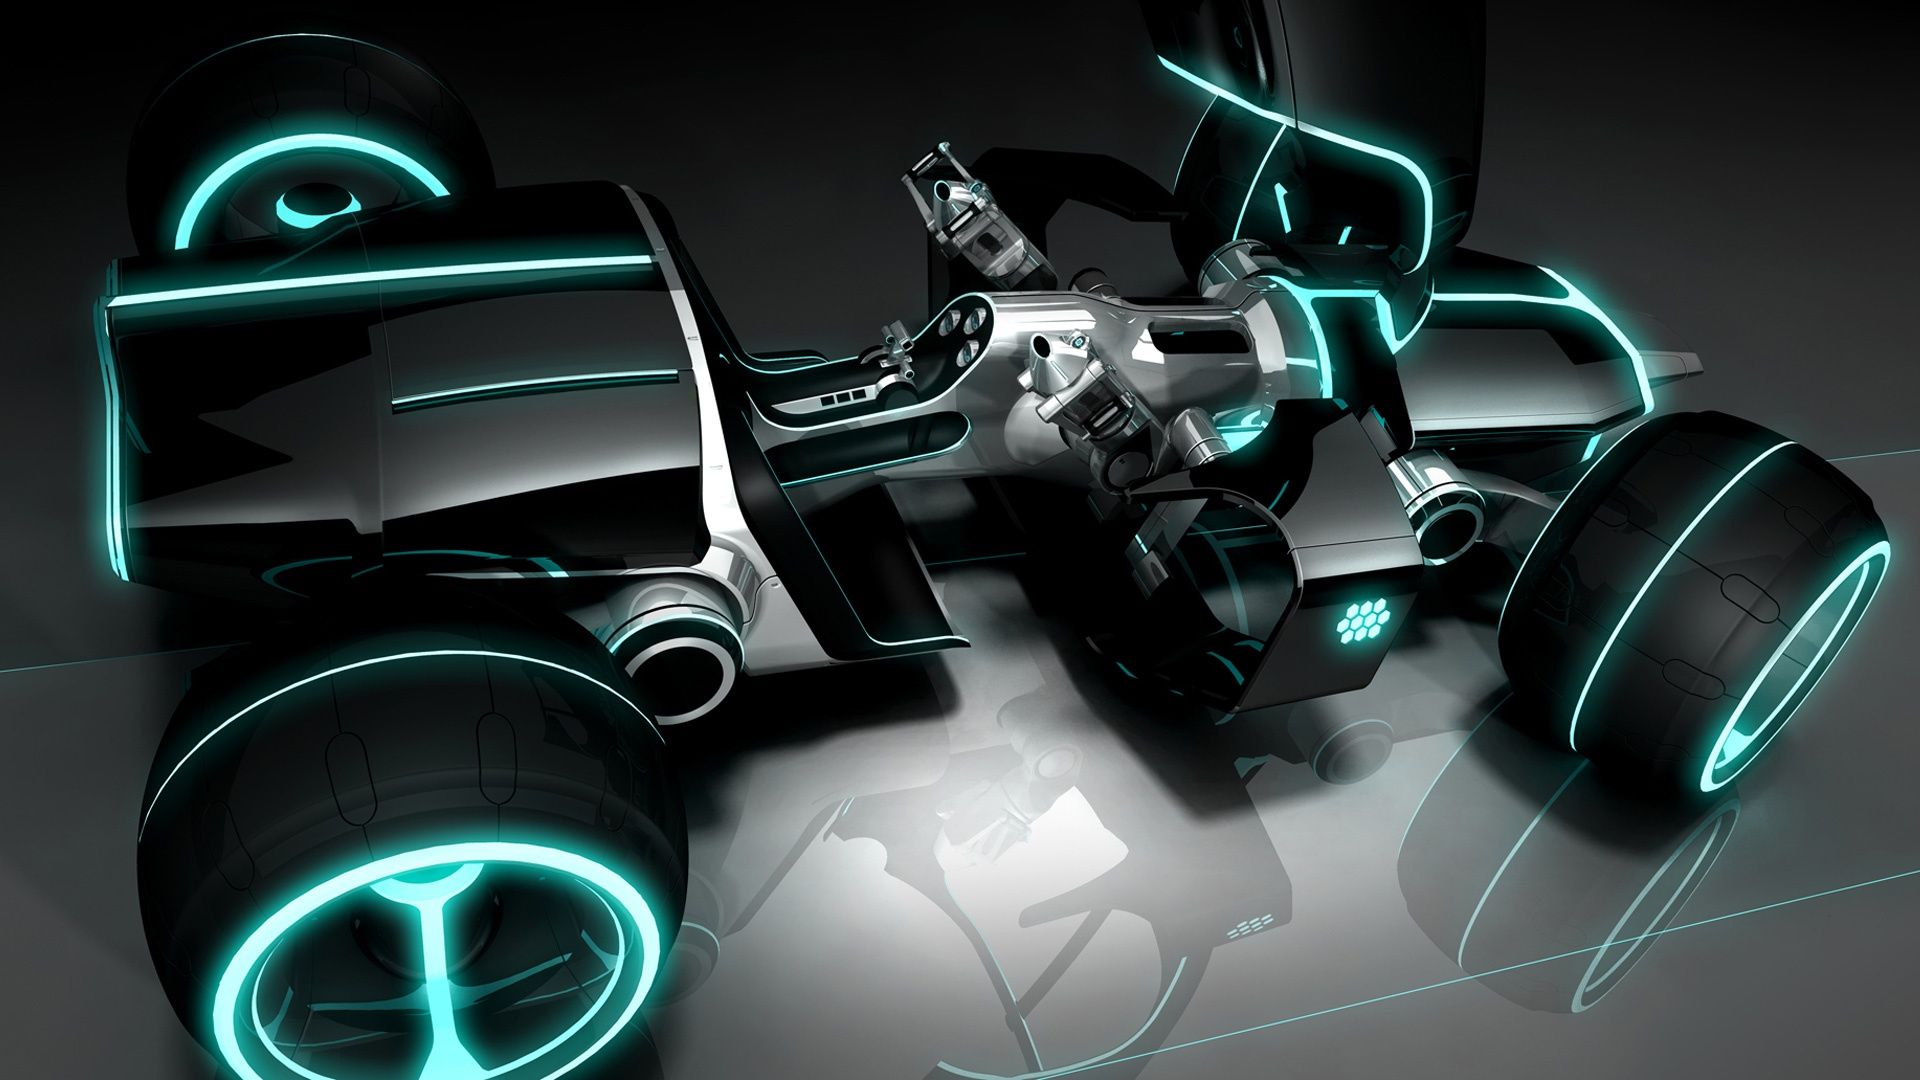 TRON LEGACY Light Car Wallpapers | HD Wallpapers